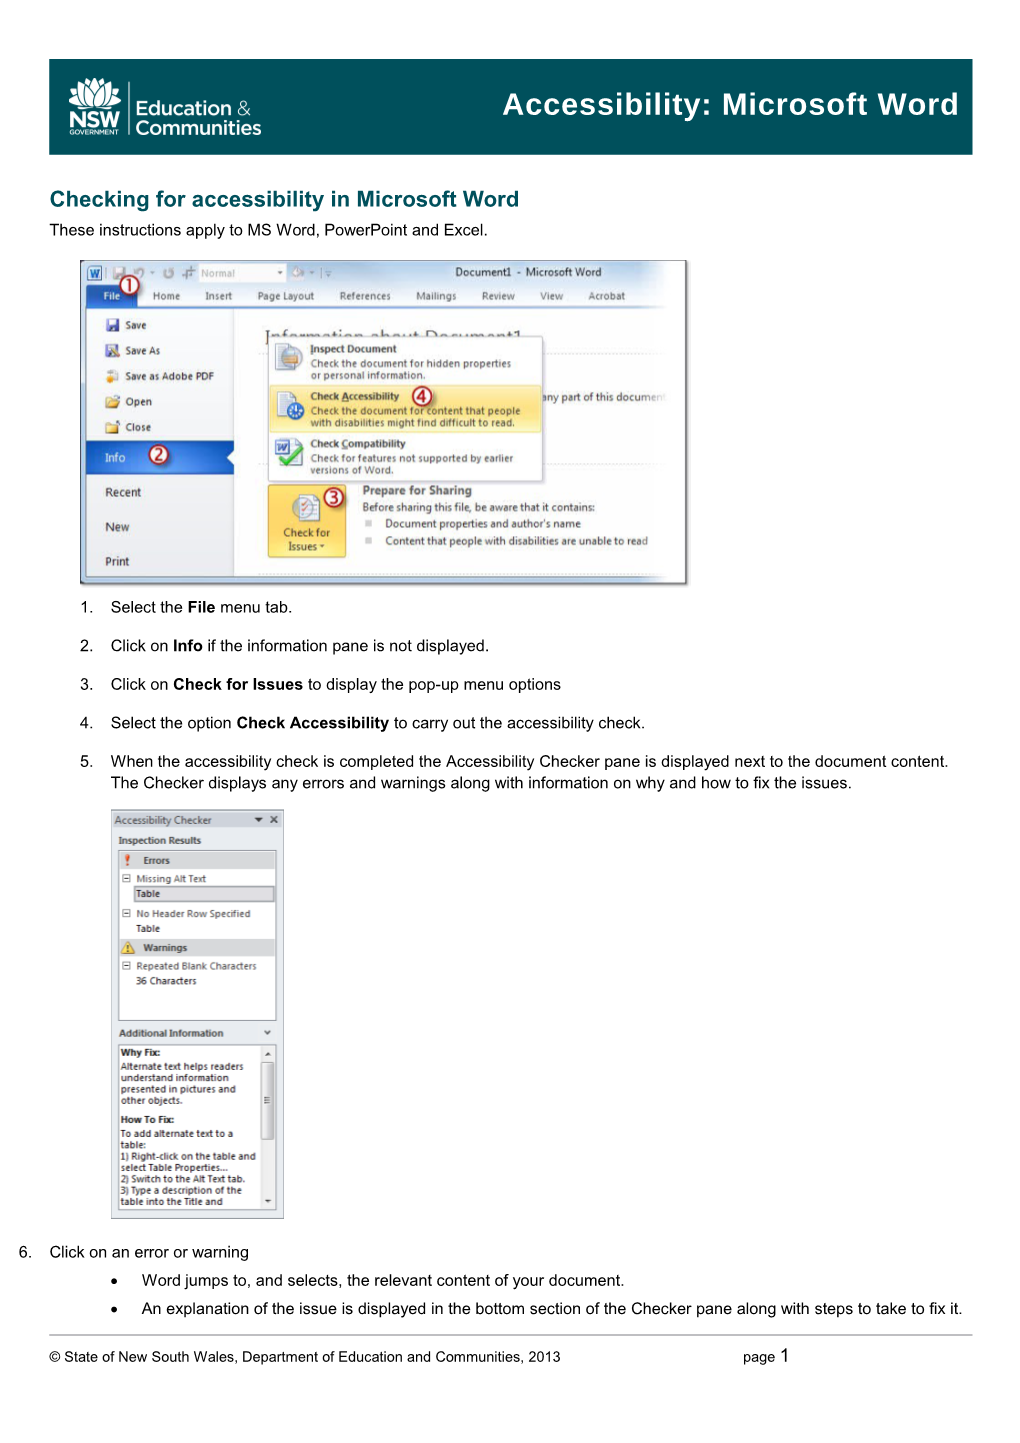 Checking for Accessibility in Microsoft Word